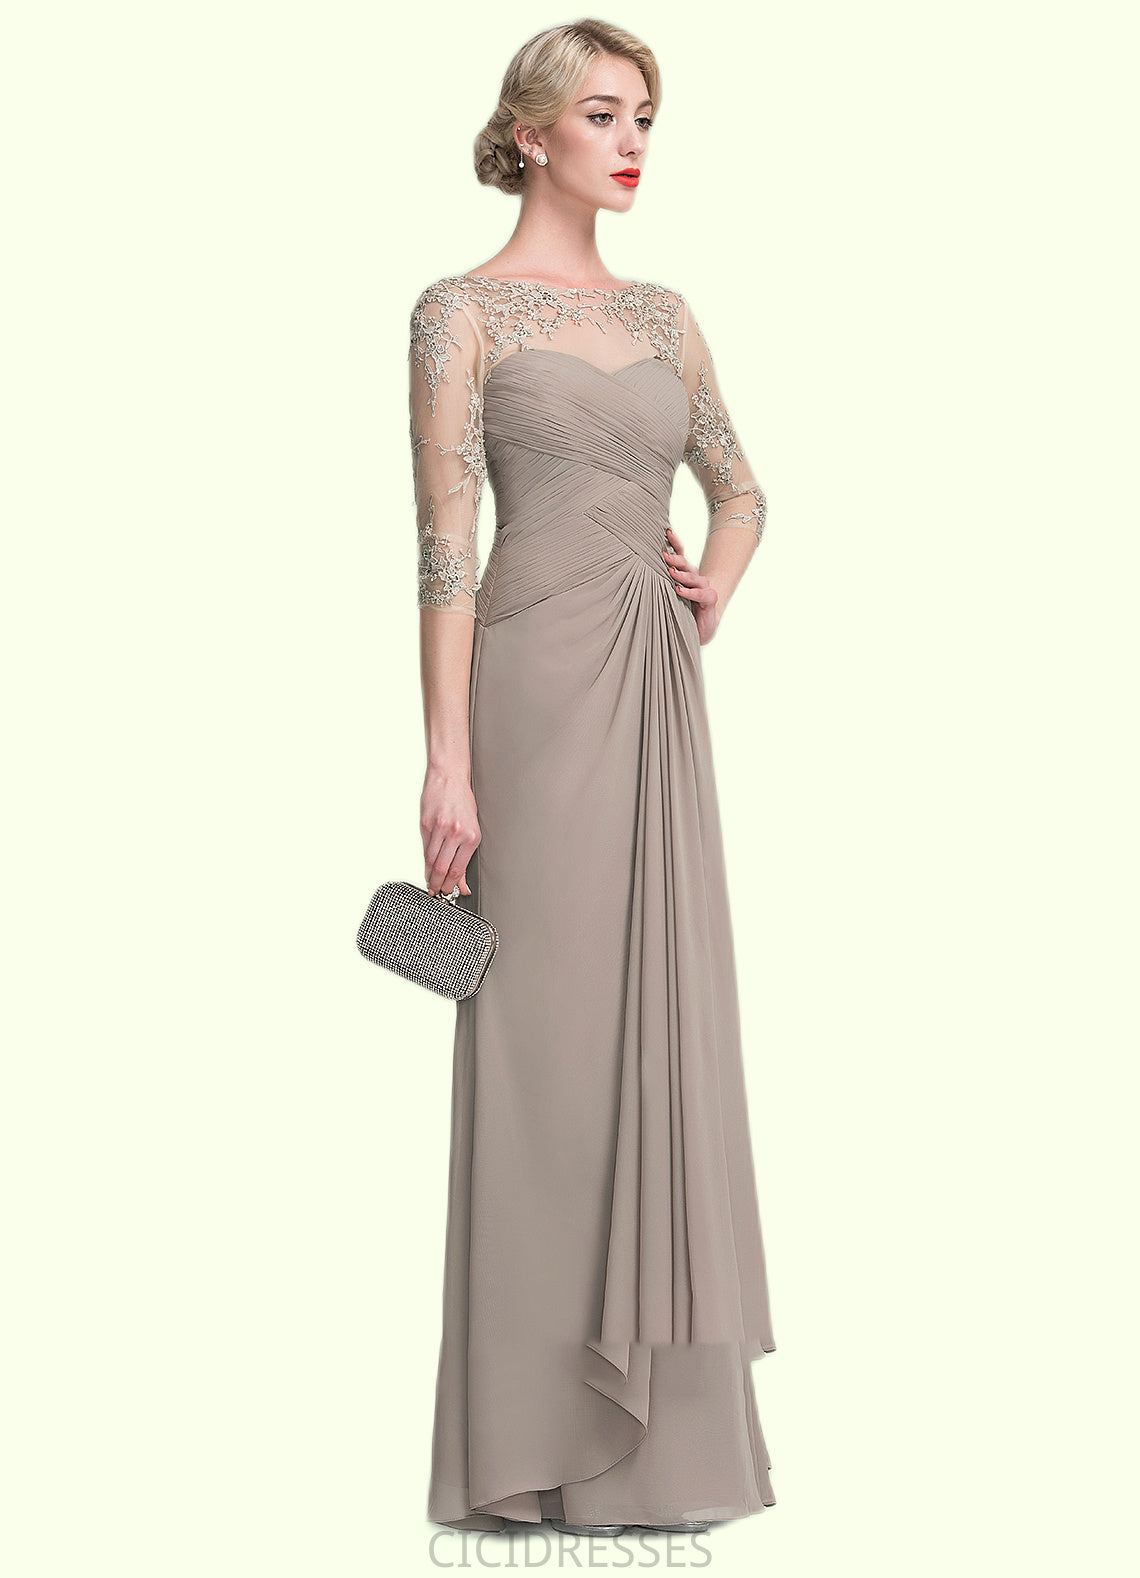 Elaina A-Line Scoop Neck Floor-Length Chiffon Lace Mother of the Bride Dress With Beading Sequins Cascading Ruffles CIC8126P0014551